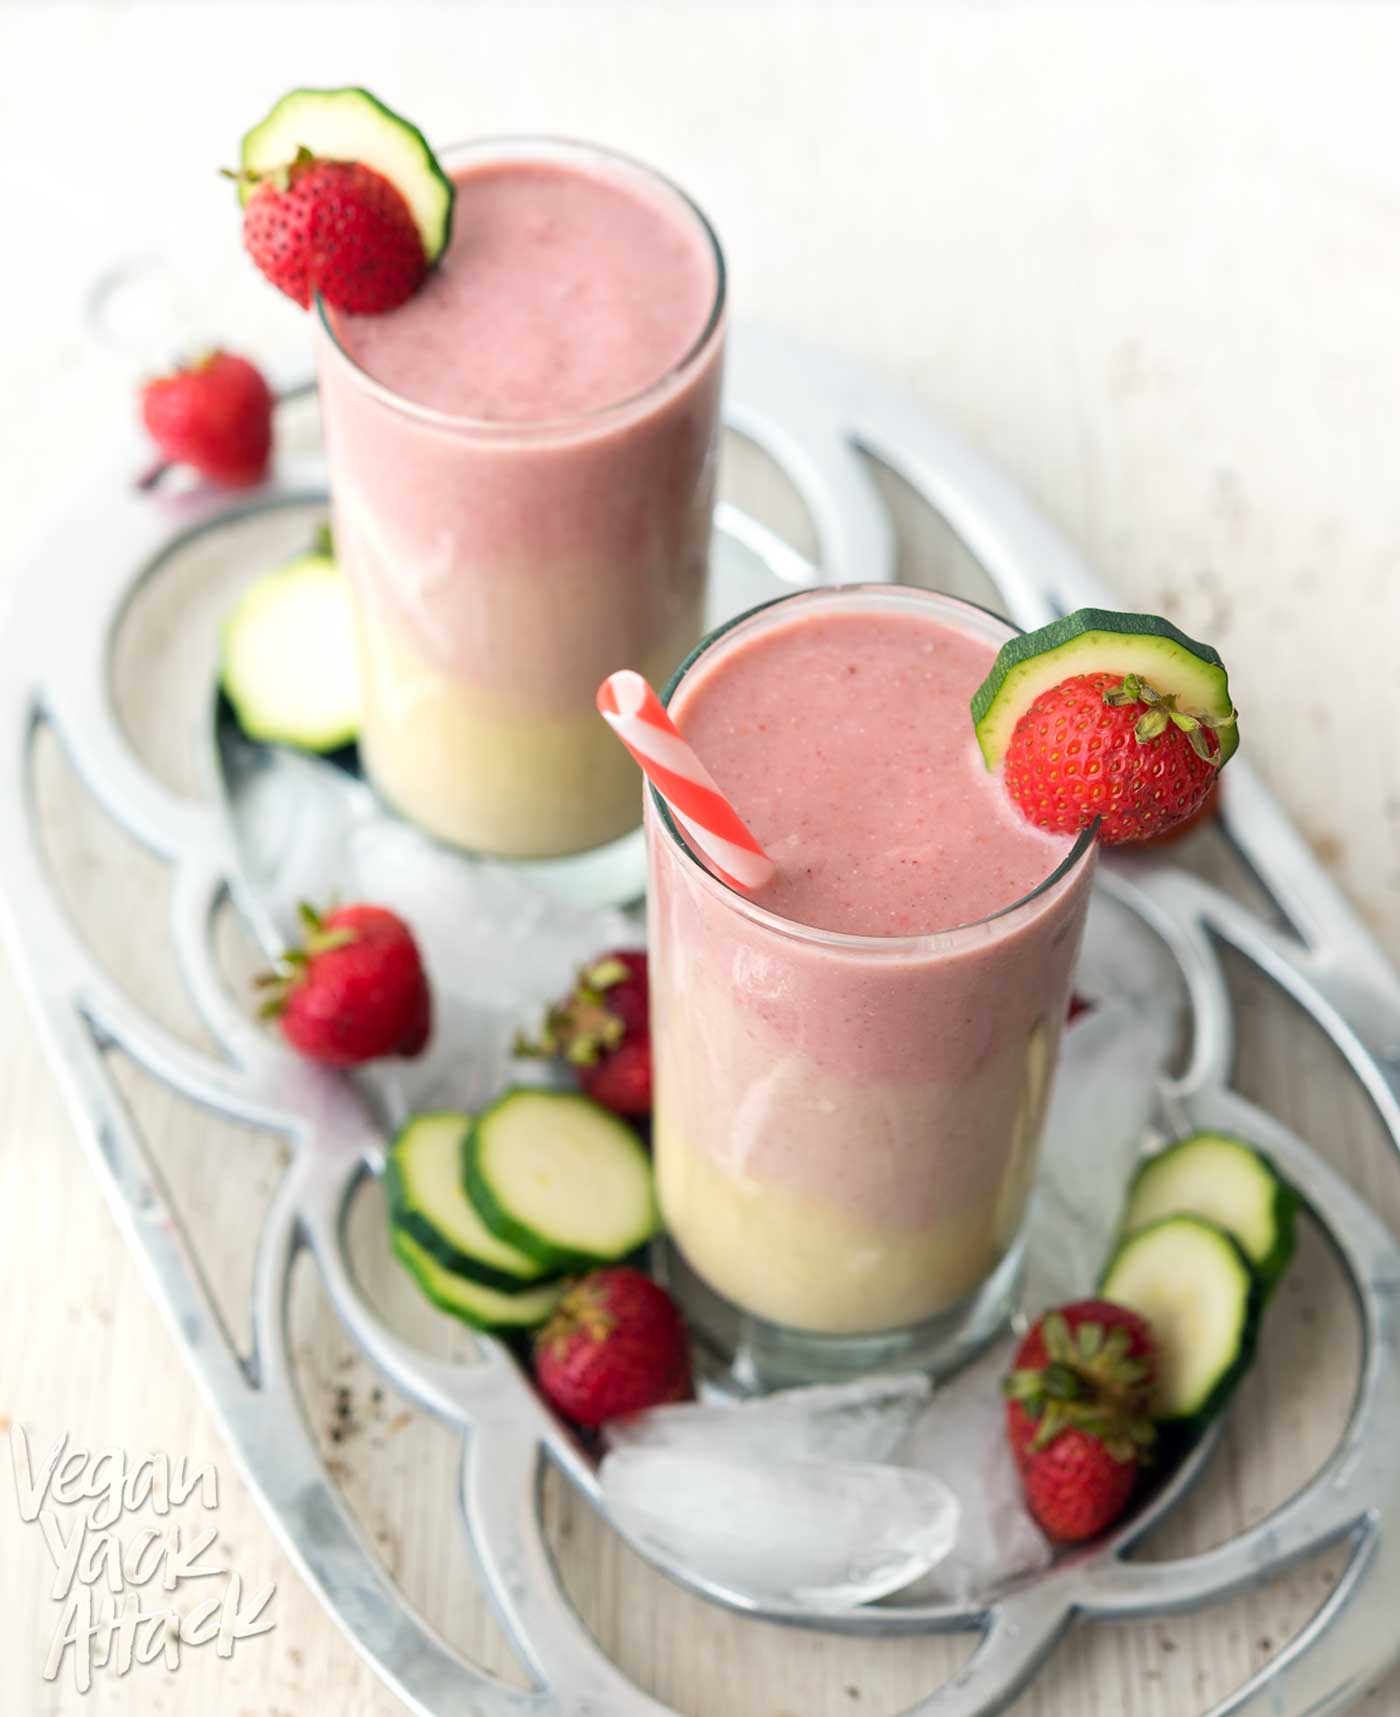 This Strawberry Peach Smoothie has beautiful, creamy layers, with some sneaky ingredients! Perfect for breakfast, or to cool down this summer. #vegan #glutenfree #soyfree #veganyackattack #SilkSmoothies